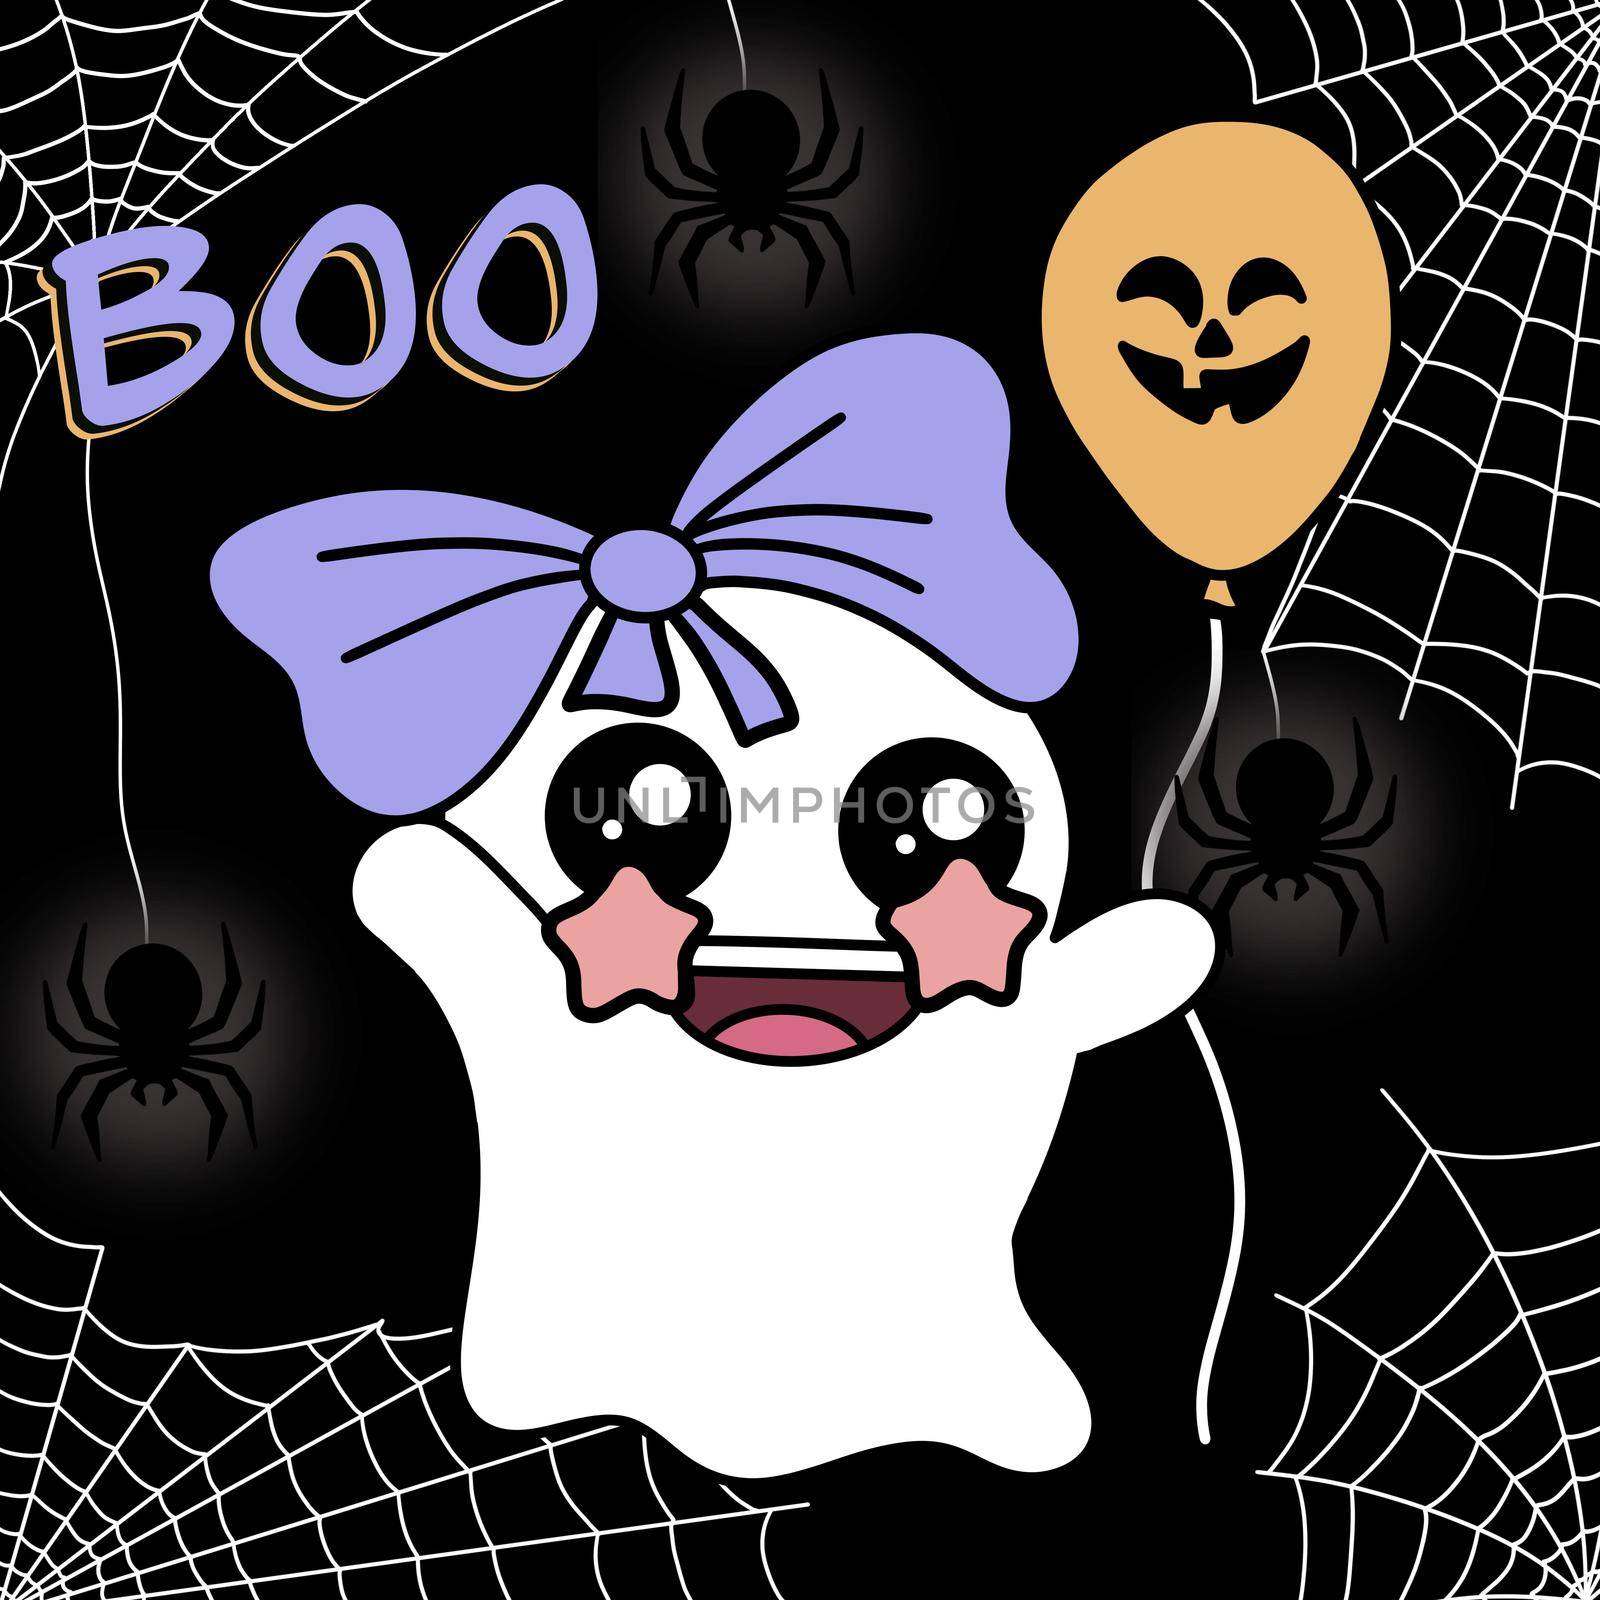 Bringing Boo on a dark background with a balloon.